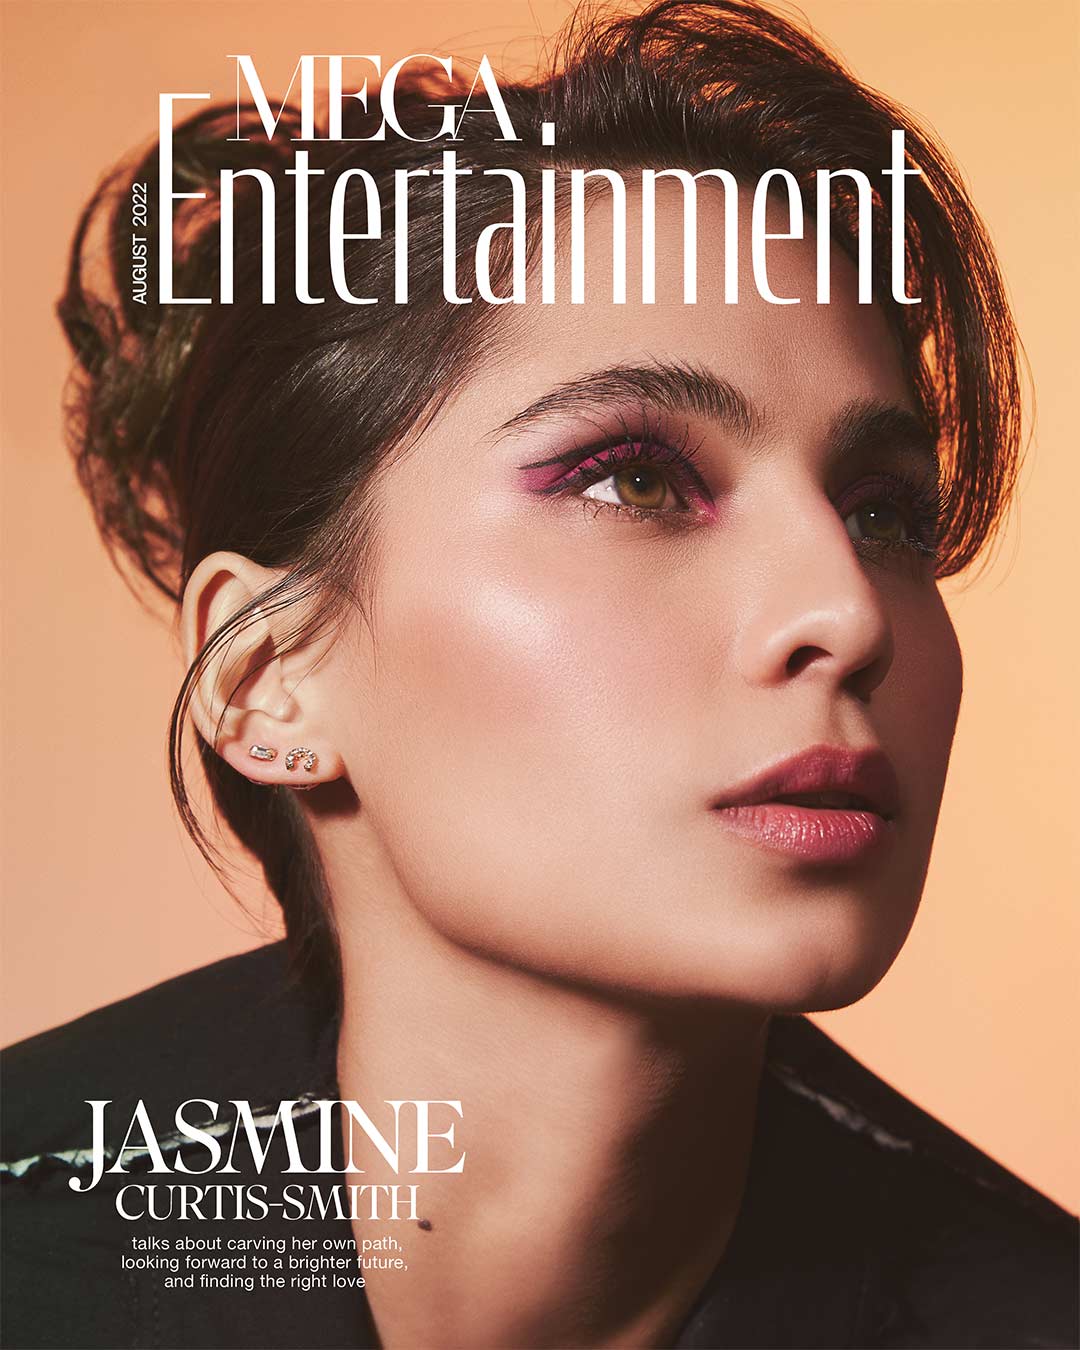 Coming Full Circle: Jasmine Curtis-Smith's Own Journey